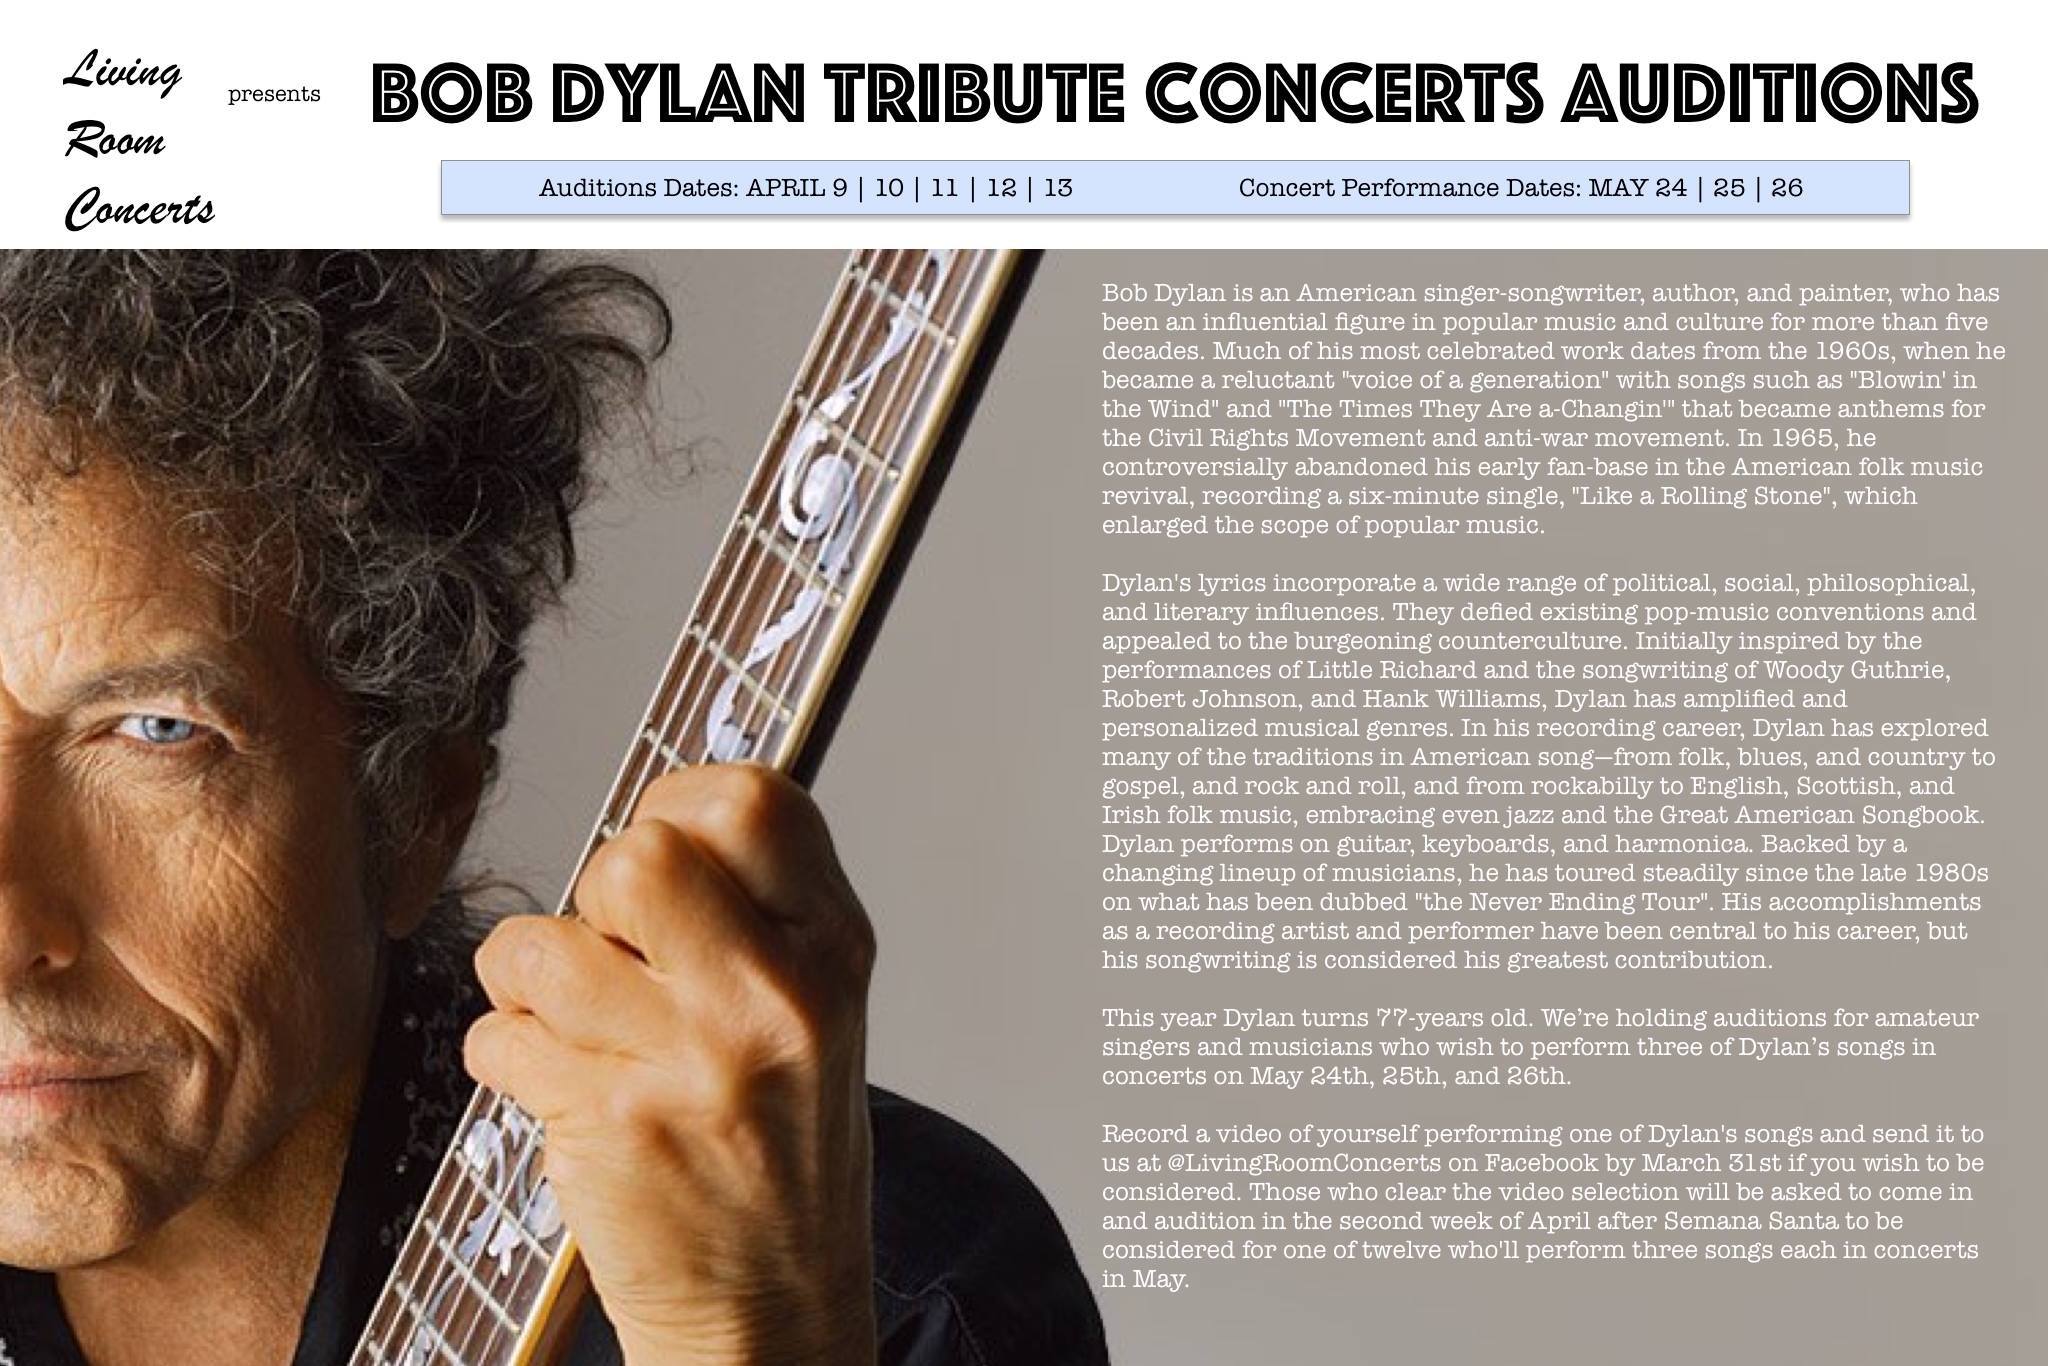 15 Feb to 31 Mar - LRC presents Bob Dylan Tribute Concerts Auditions